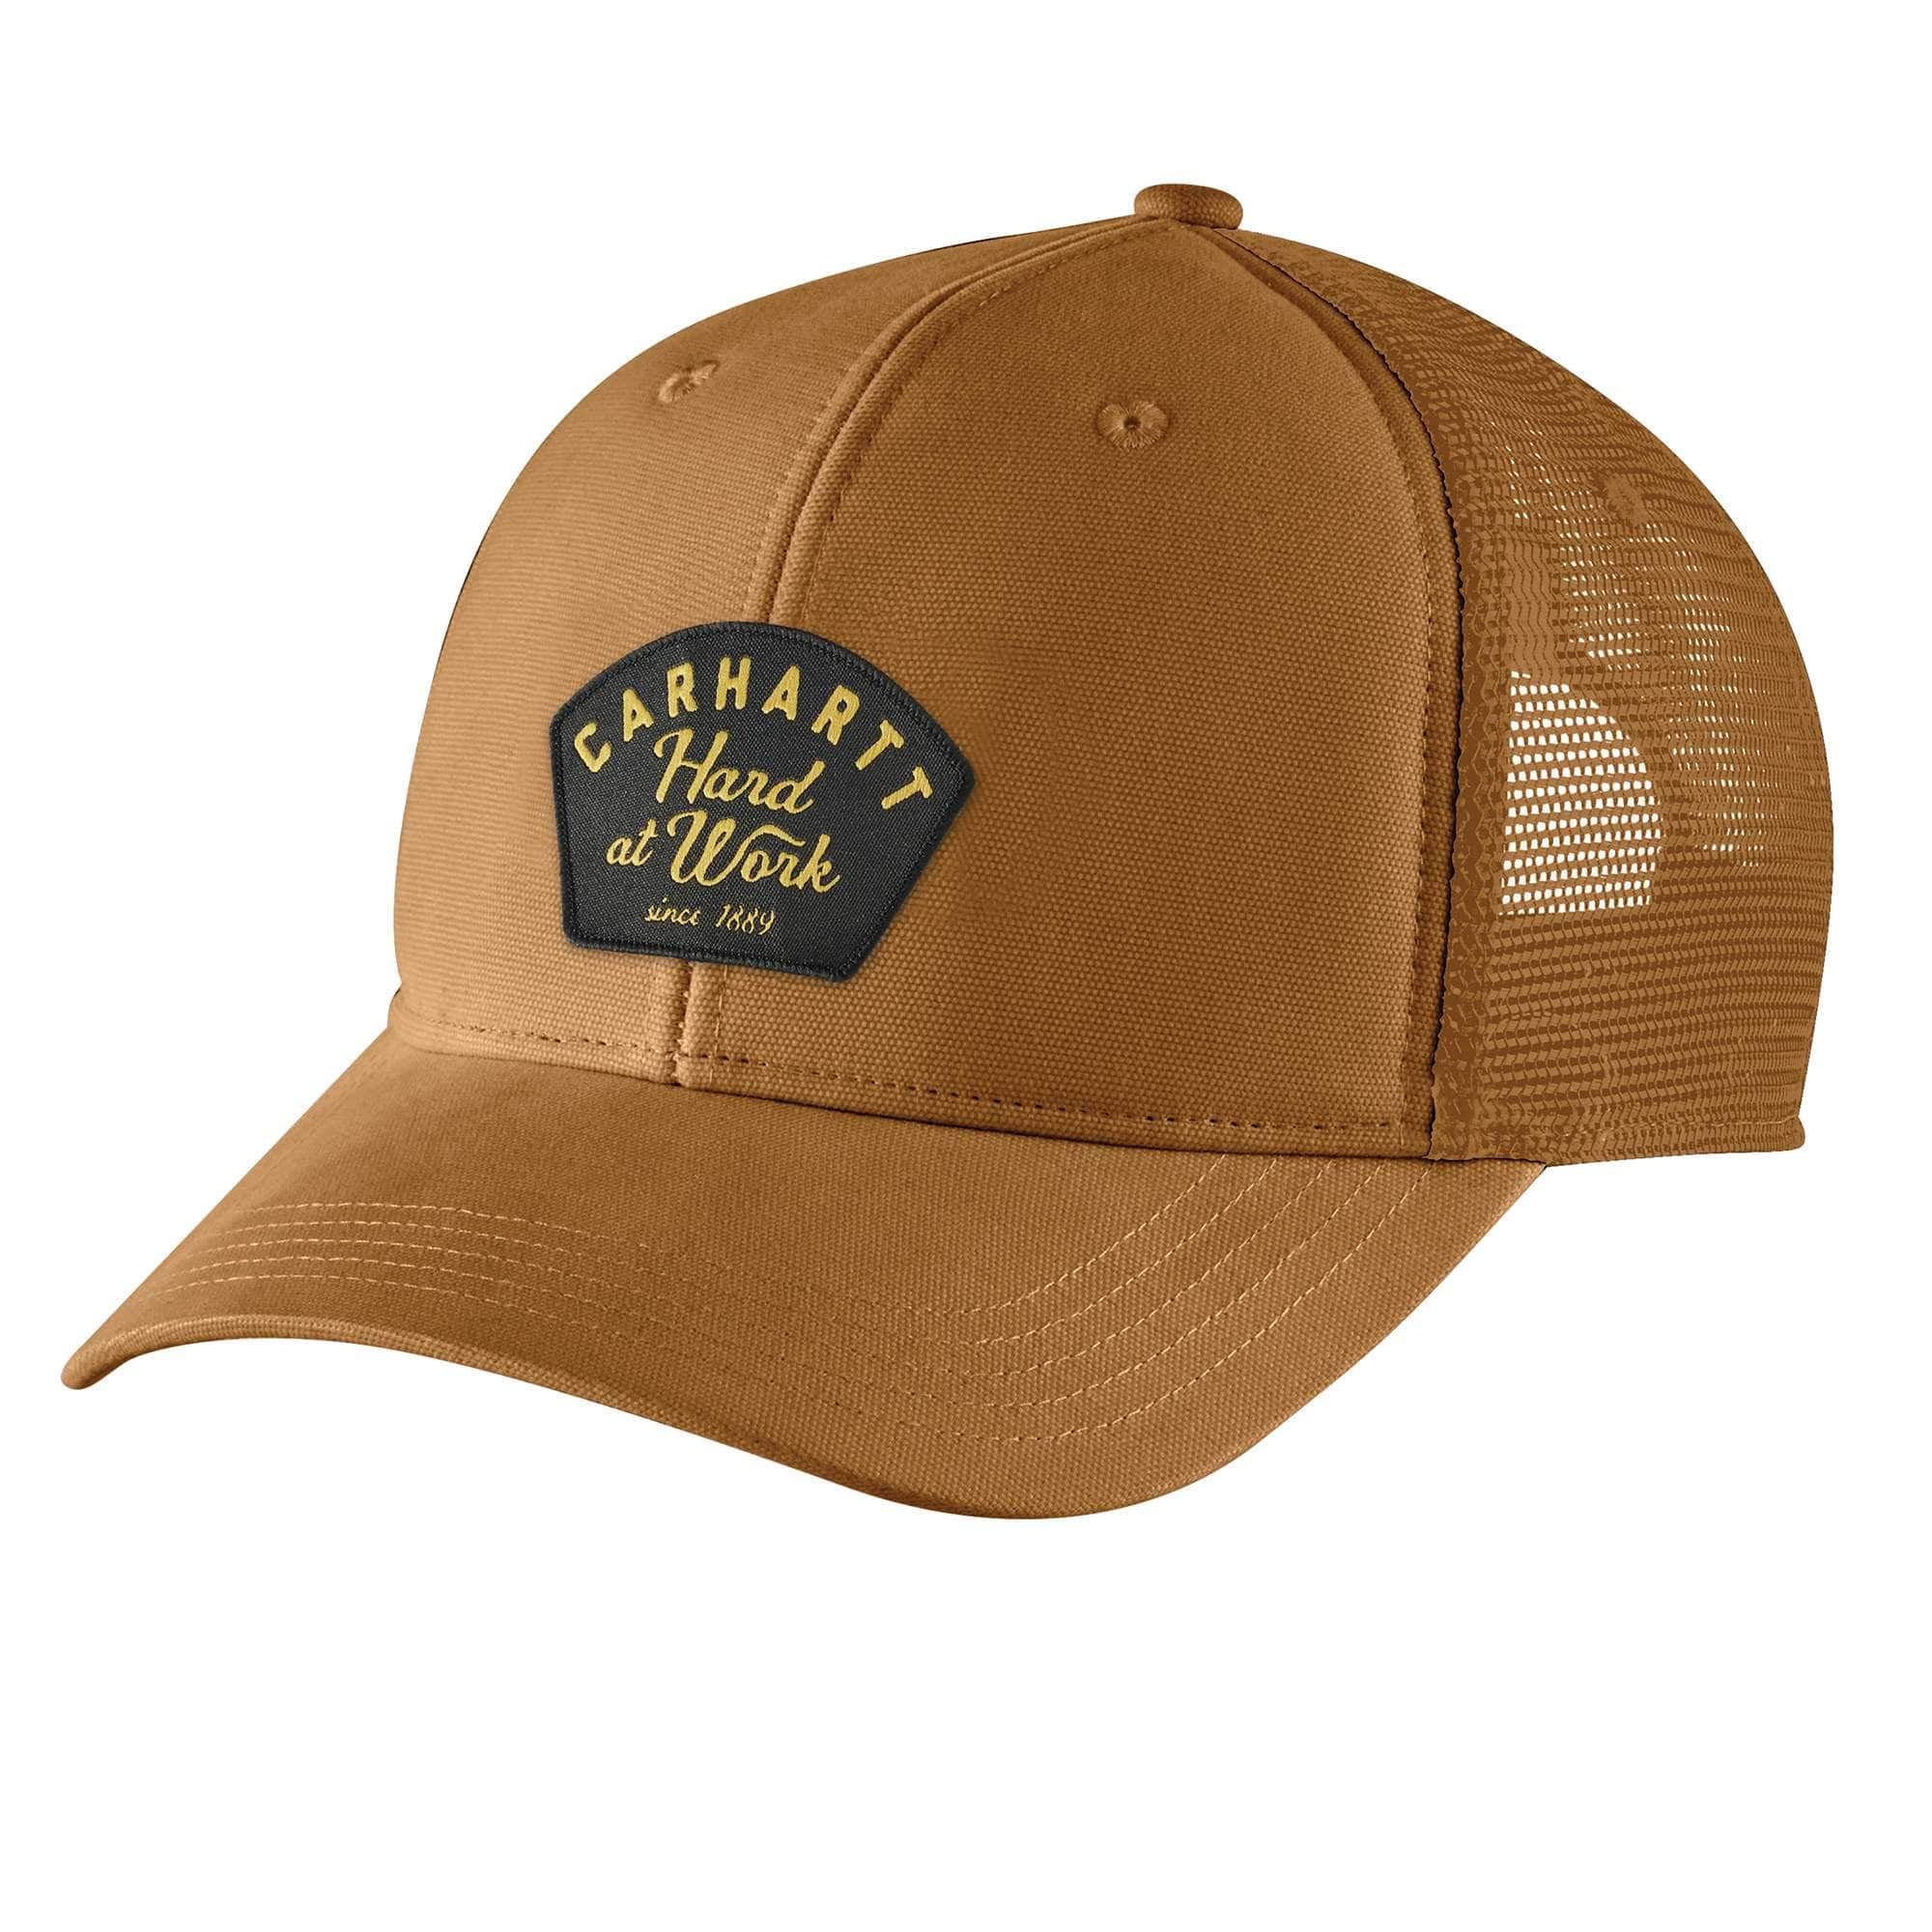 Carhartt Force Extremes Angler Neck Shade Cap for Men